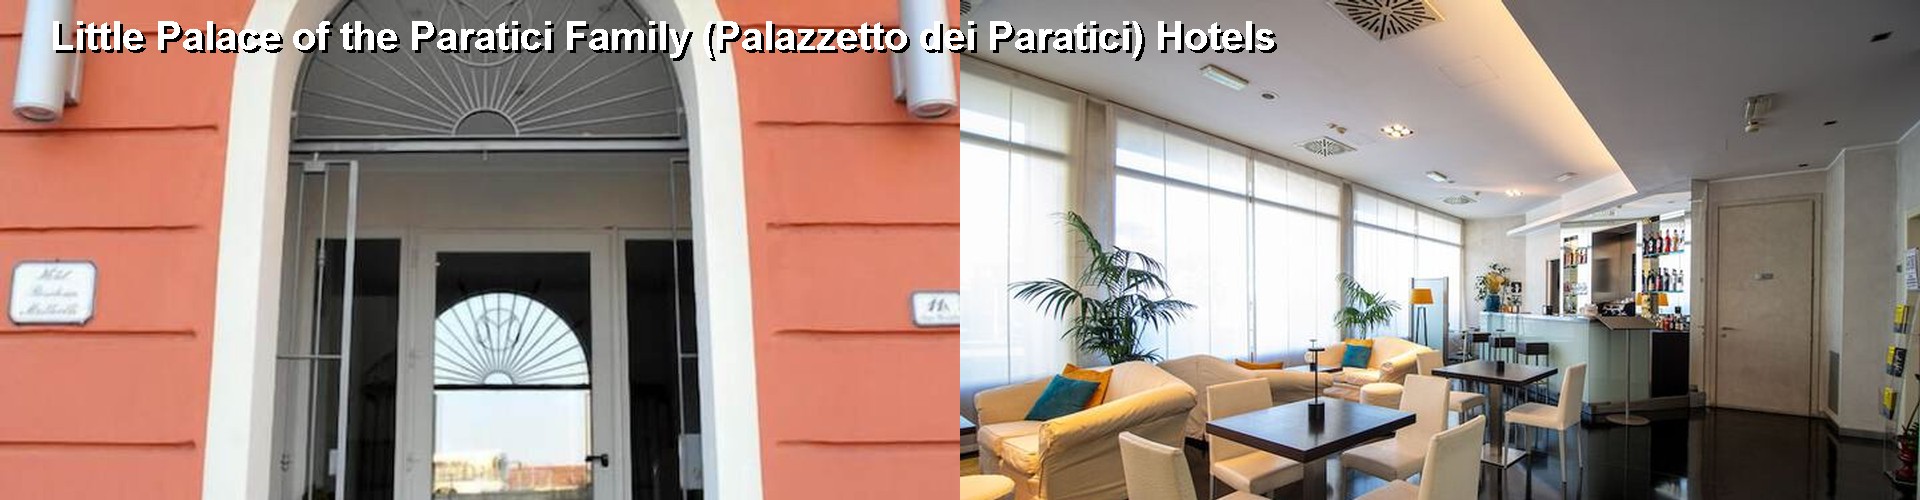 5 Best Hotels near Little Palace of the Paratici Family (Palazzetto dei Paratici)